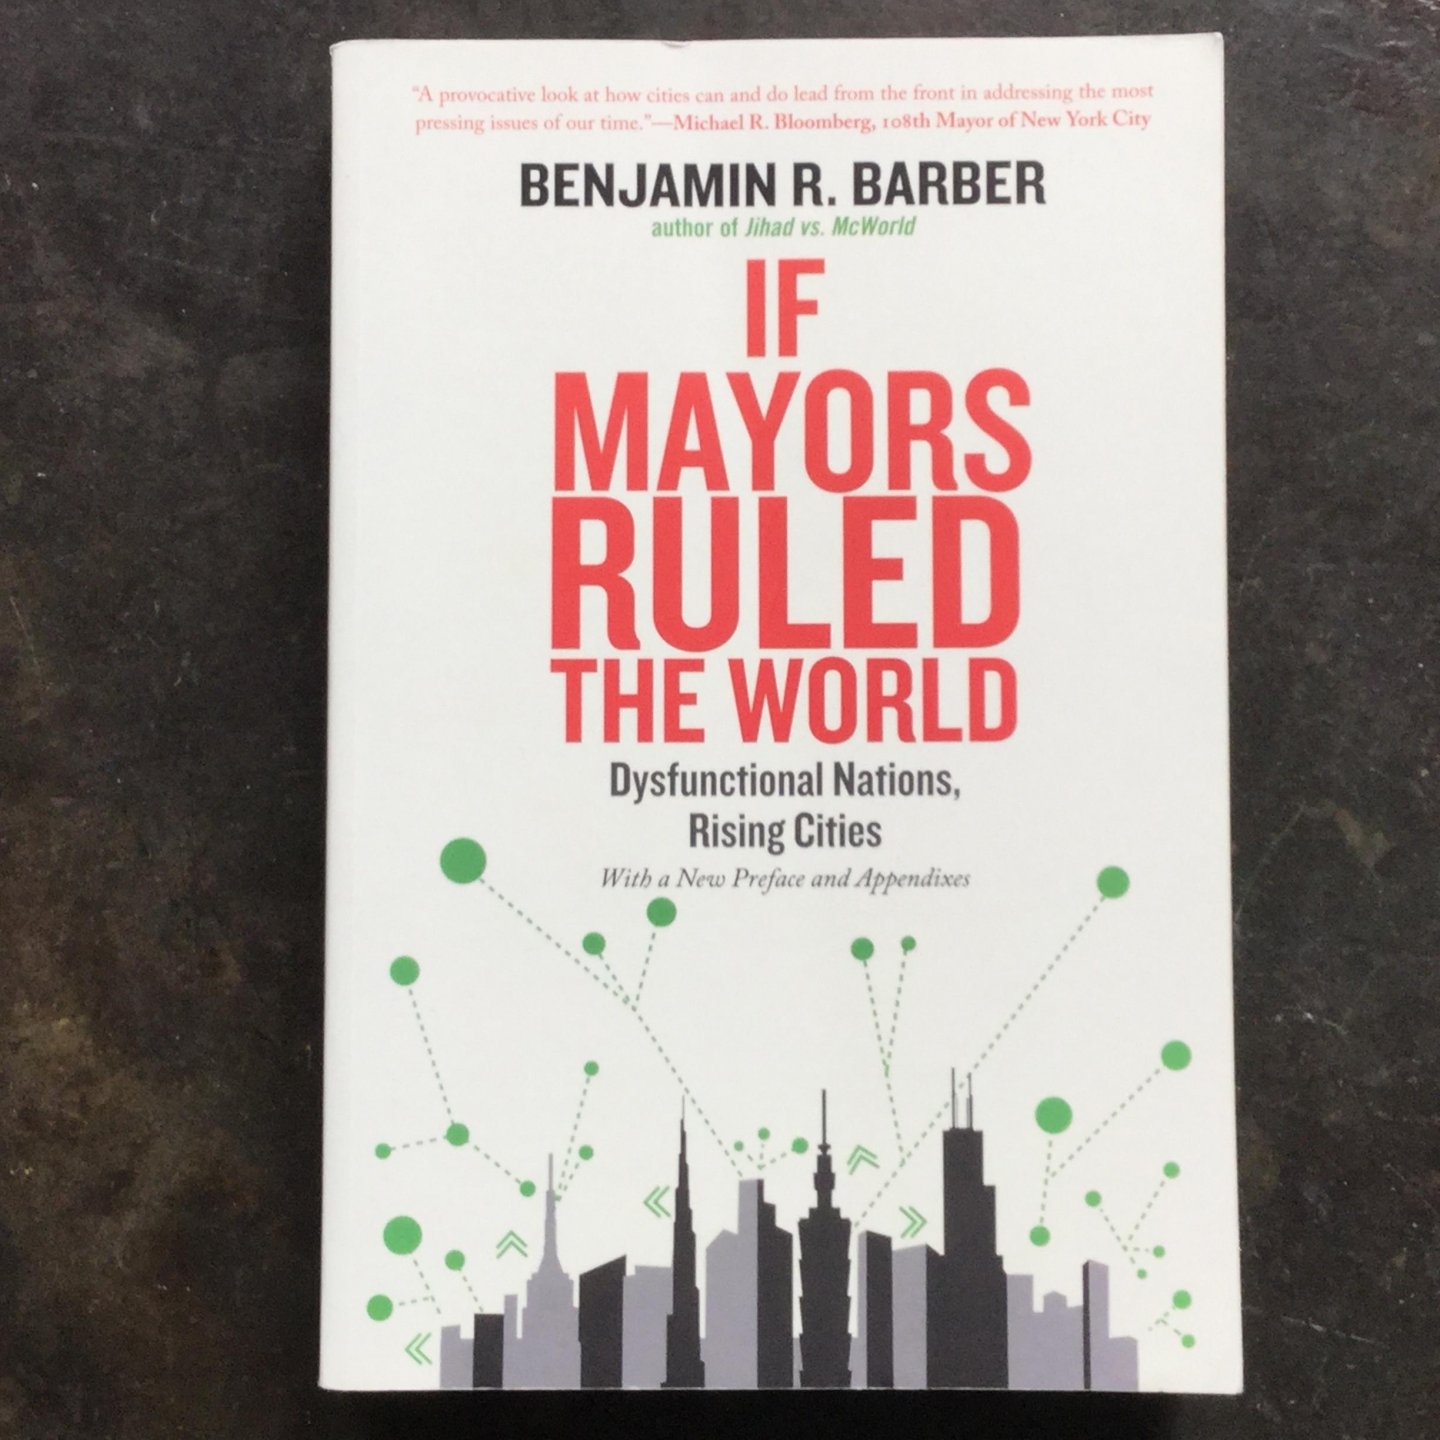 Barber, Benjamin R. - If Mayors Ruled the World.  Dysfunctional Nations, Rising Cities